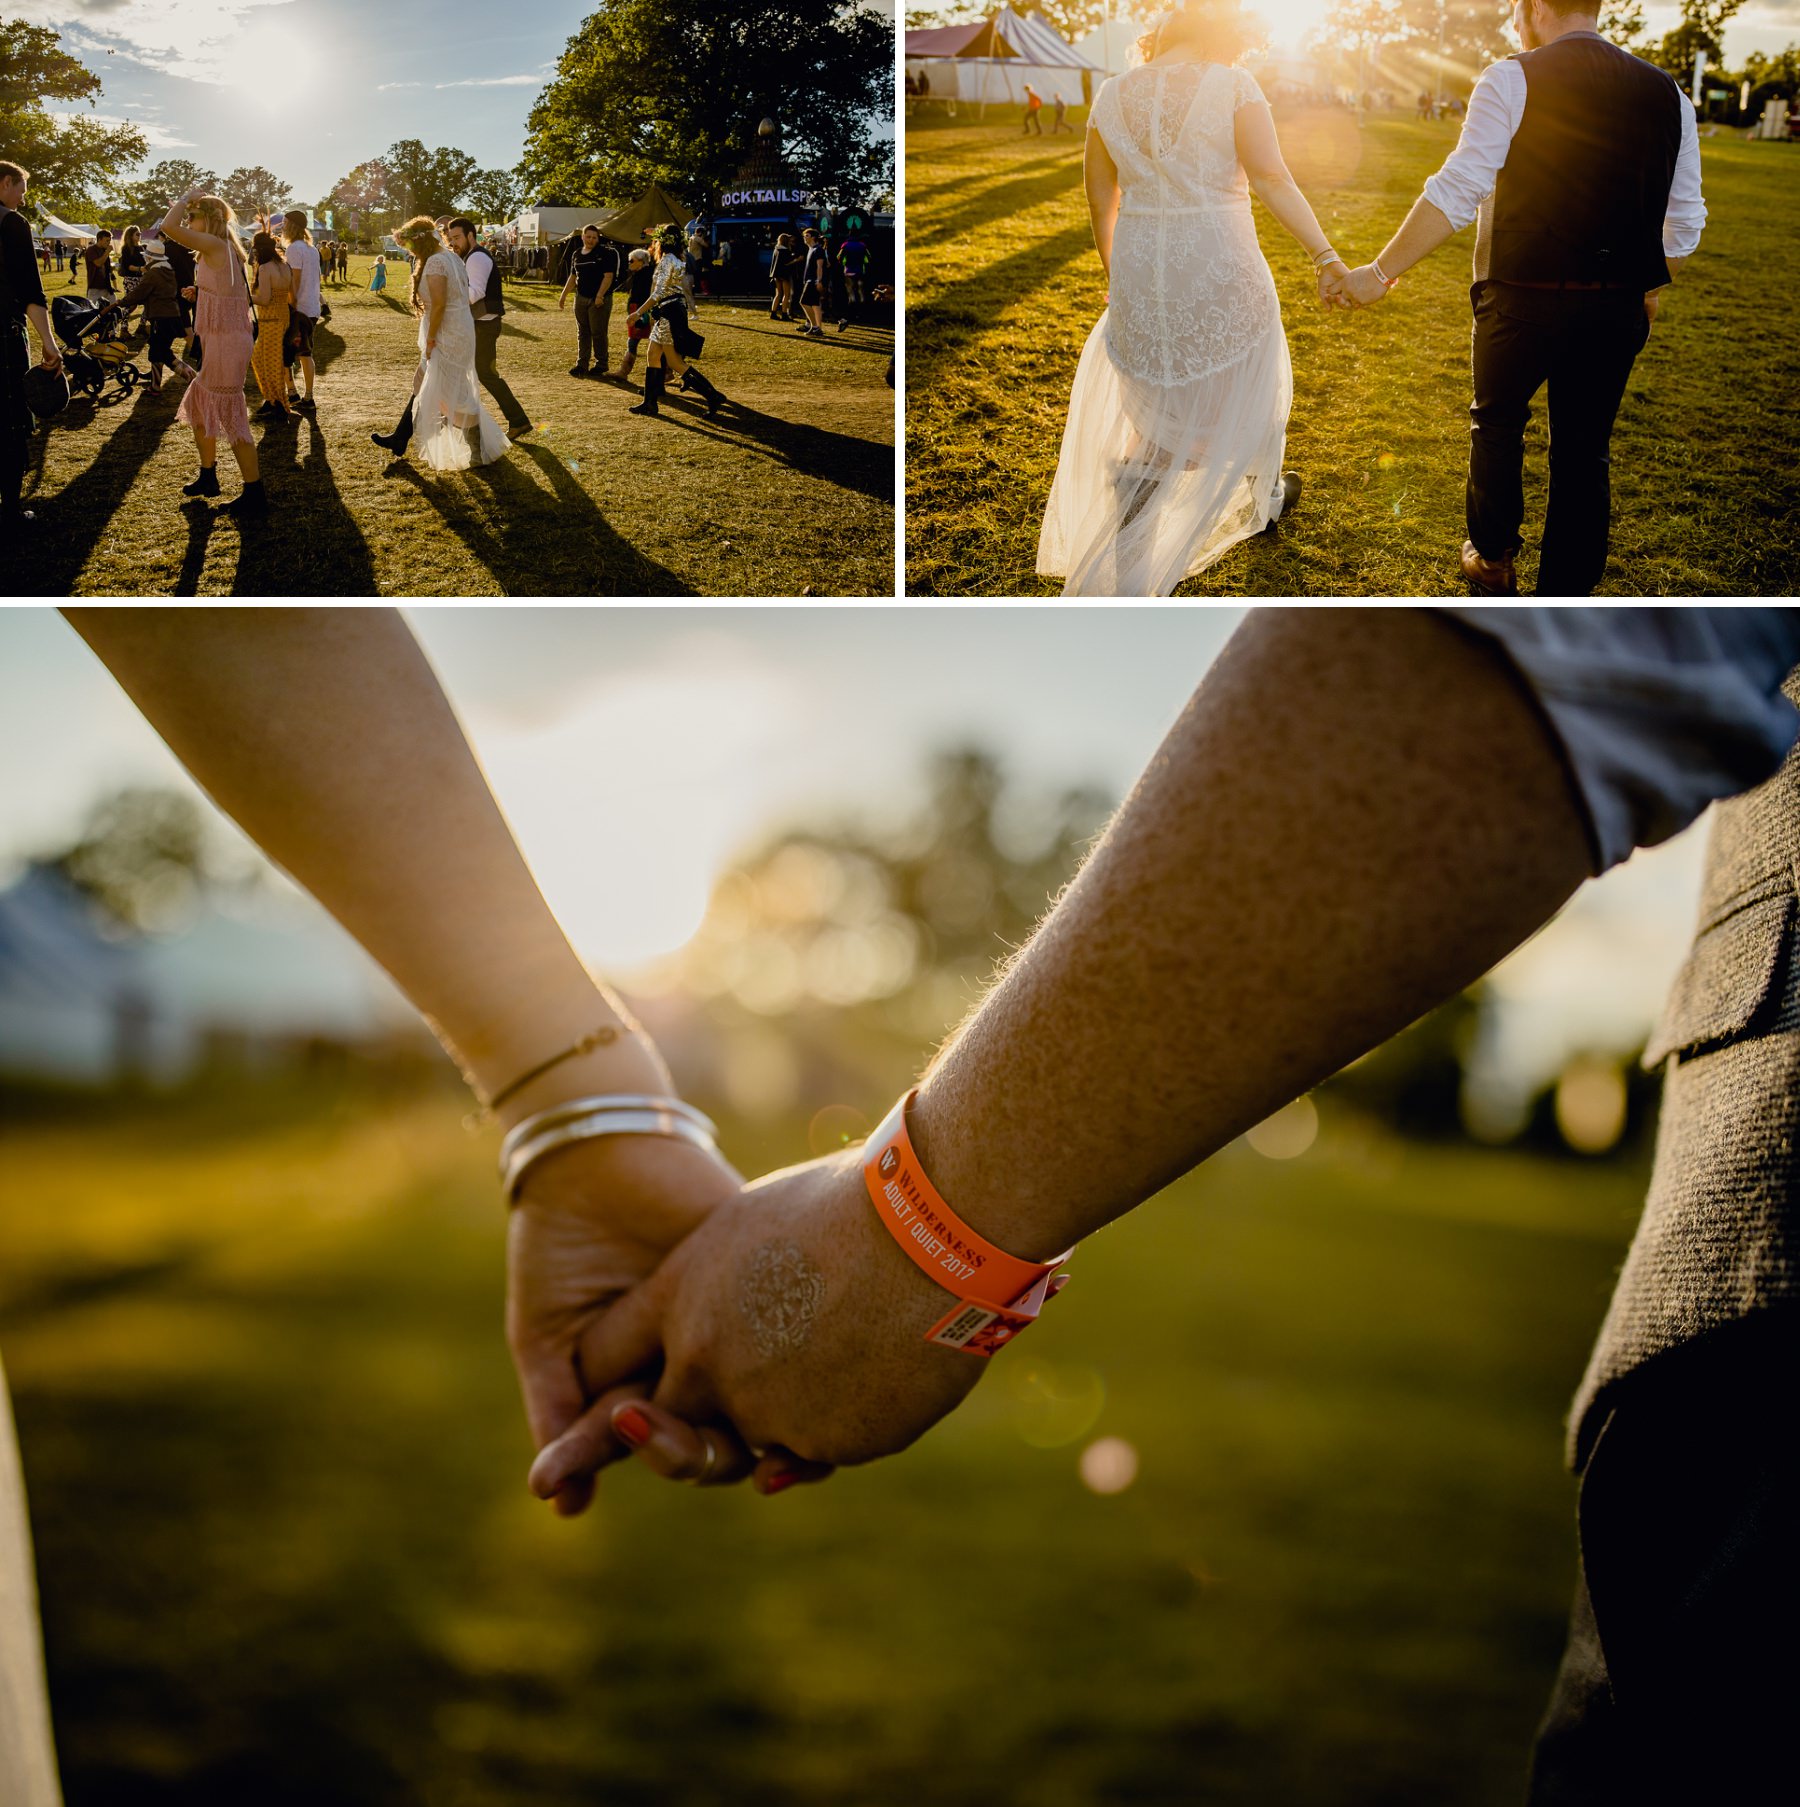 wristbands and good light at the festival 